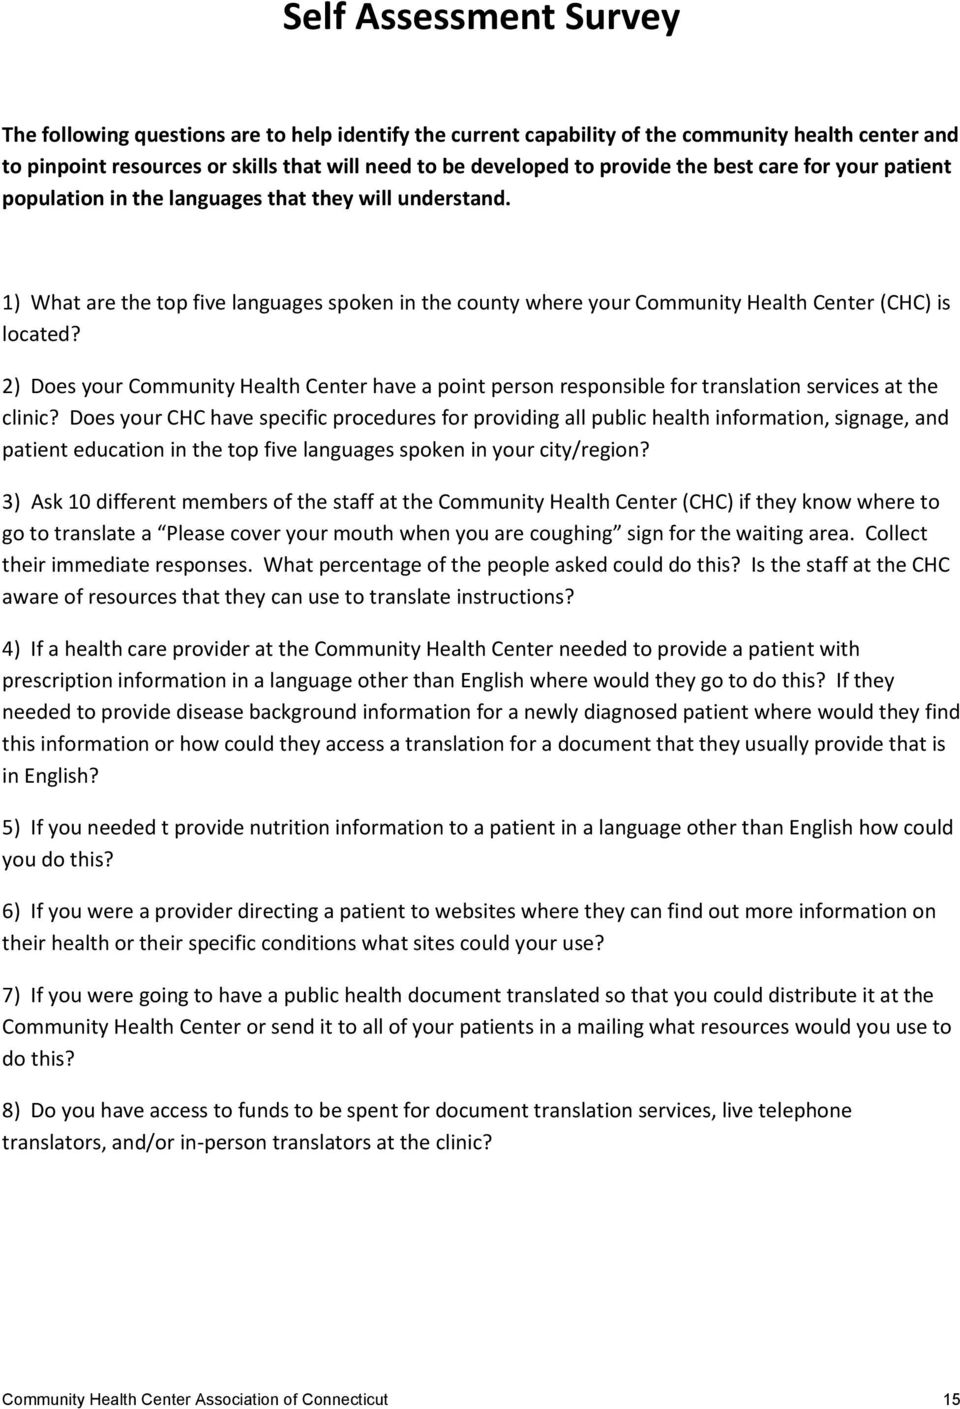 2) Does your Community Health Center have a point person responsible for translation services at the clinic?